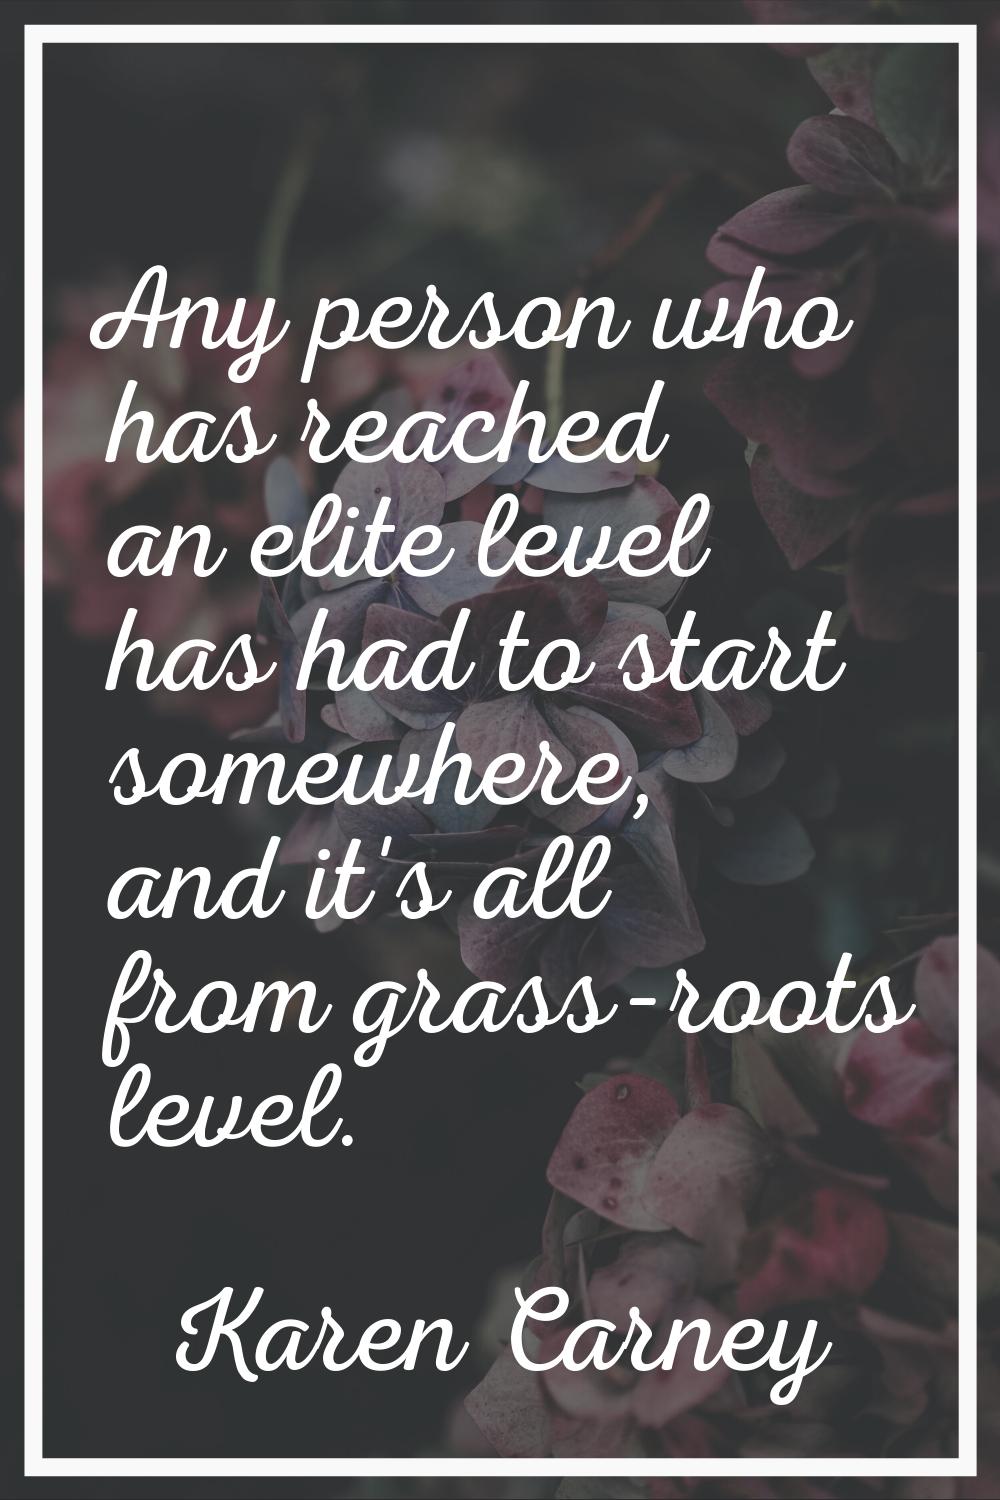 Any person who has reached an elite level has had to start somewhere, and it's all from grass-roots